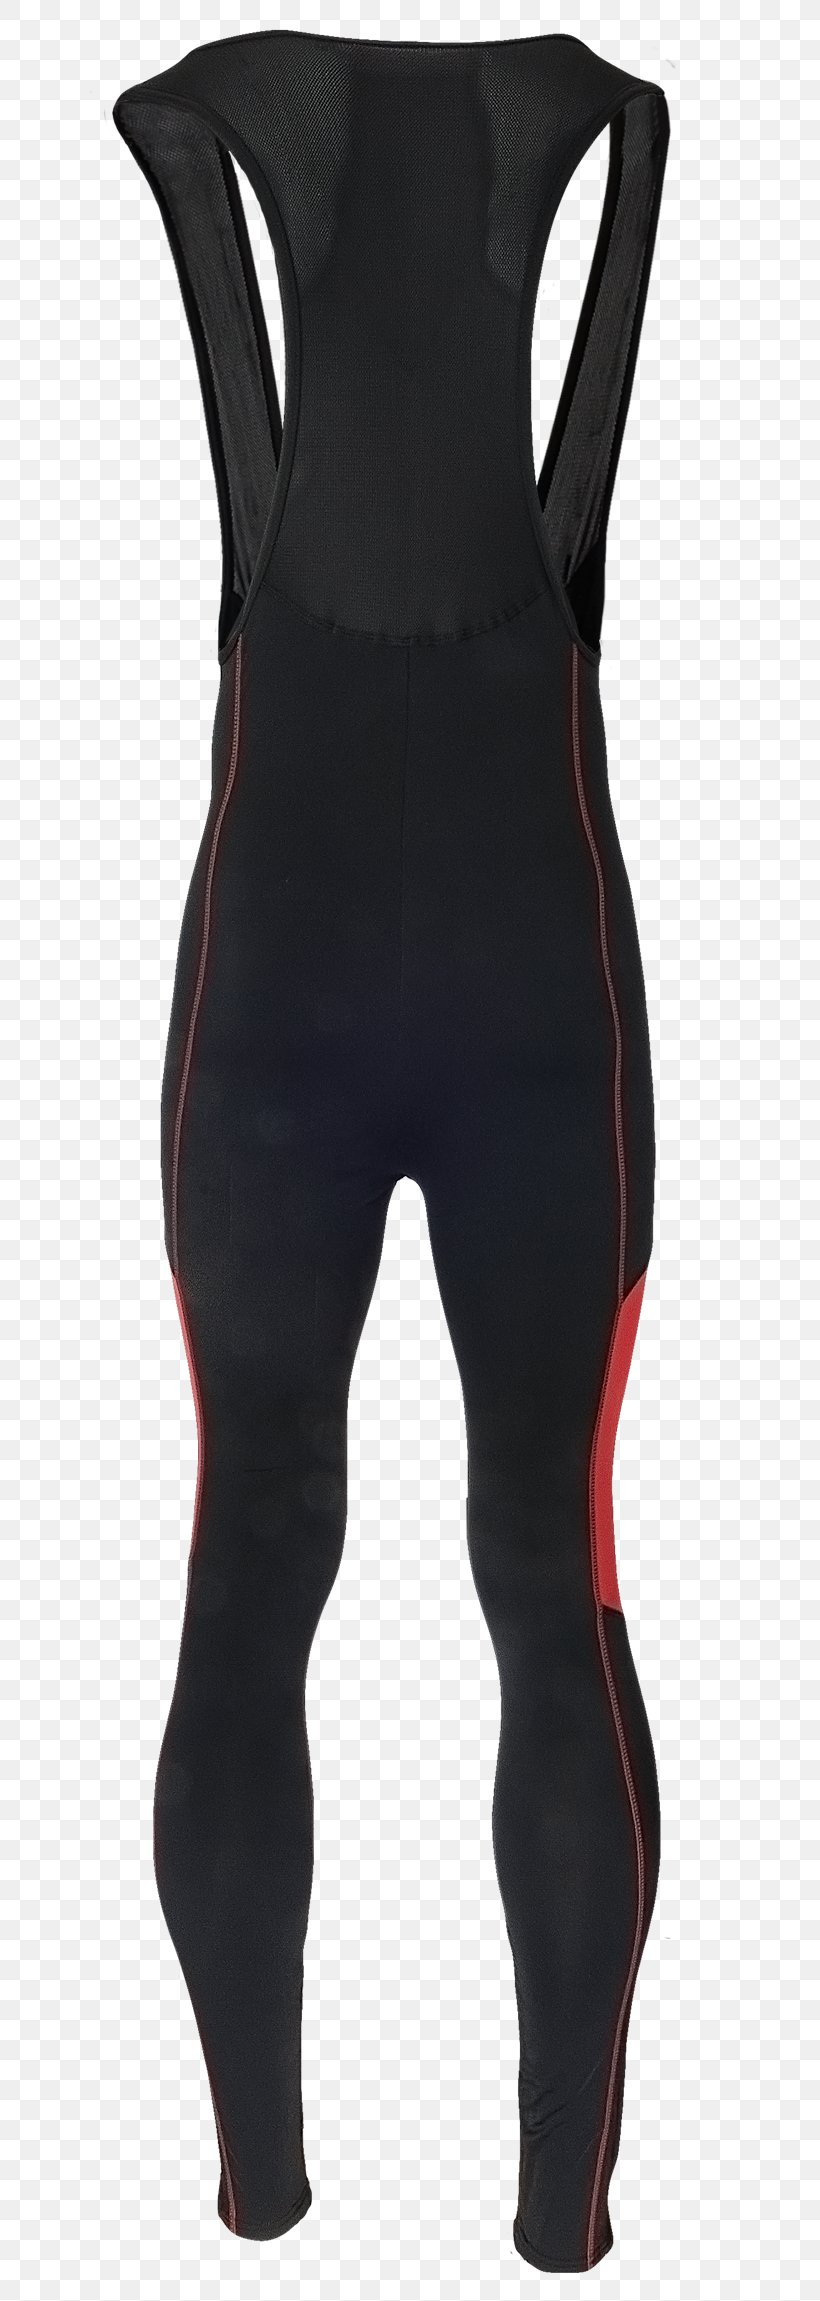 Wetsuit, PNG, 650x2301px, Wetsuit, Personal Protective Equipment, Tights Download Free